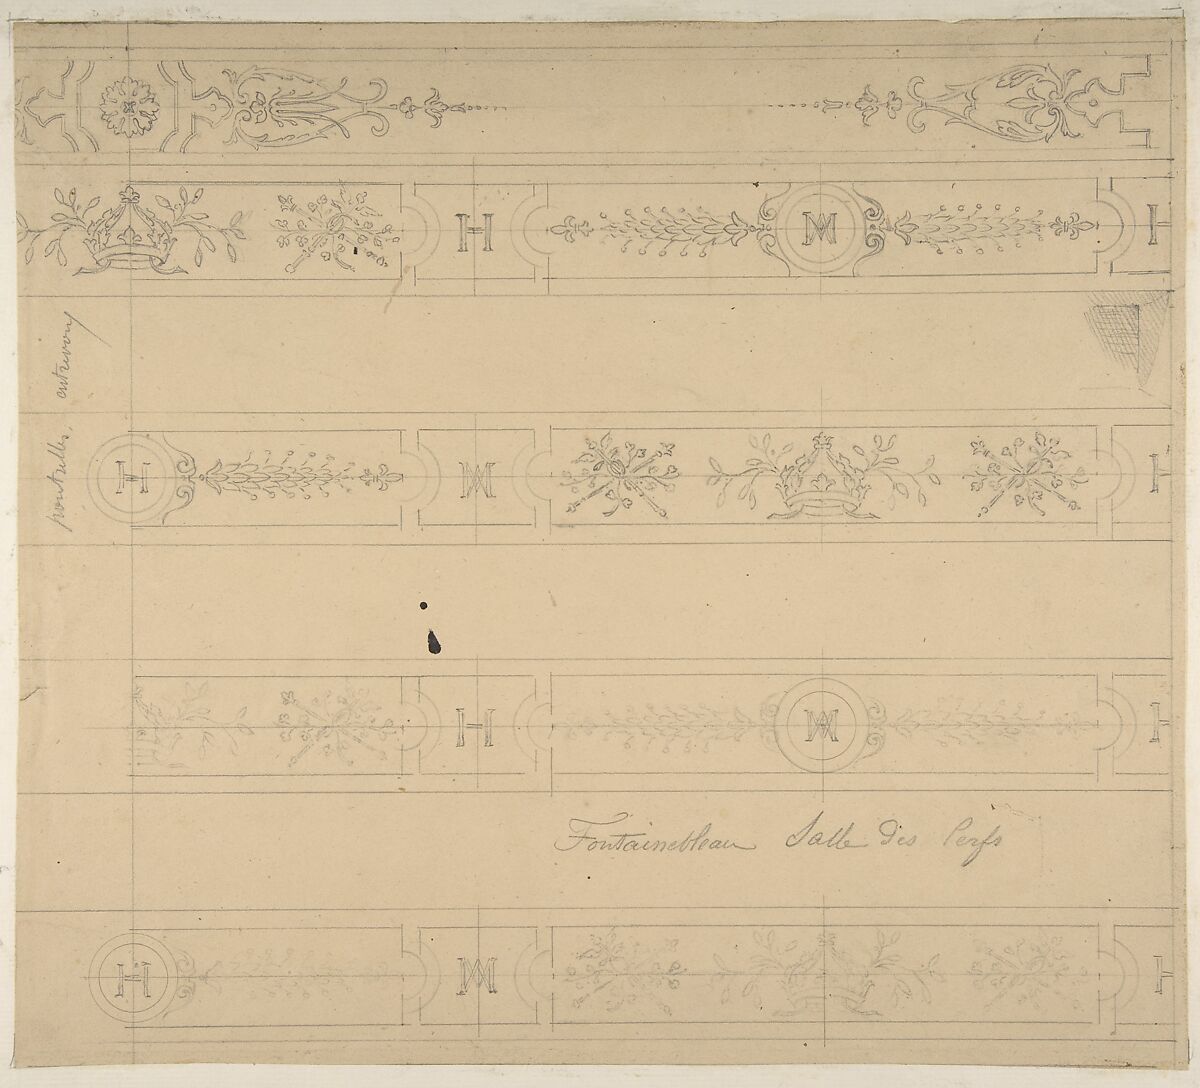 Ceiling Design for the "Salle des Cerfs", Fontainebleau, Jules-Edmond-Charles Lachaise (French, died 1897), Graphite 